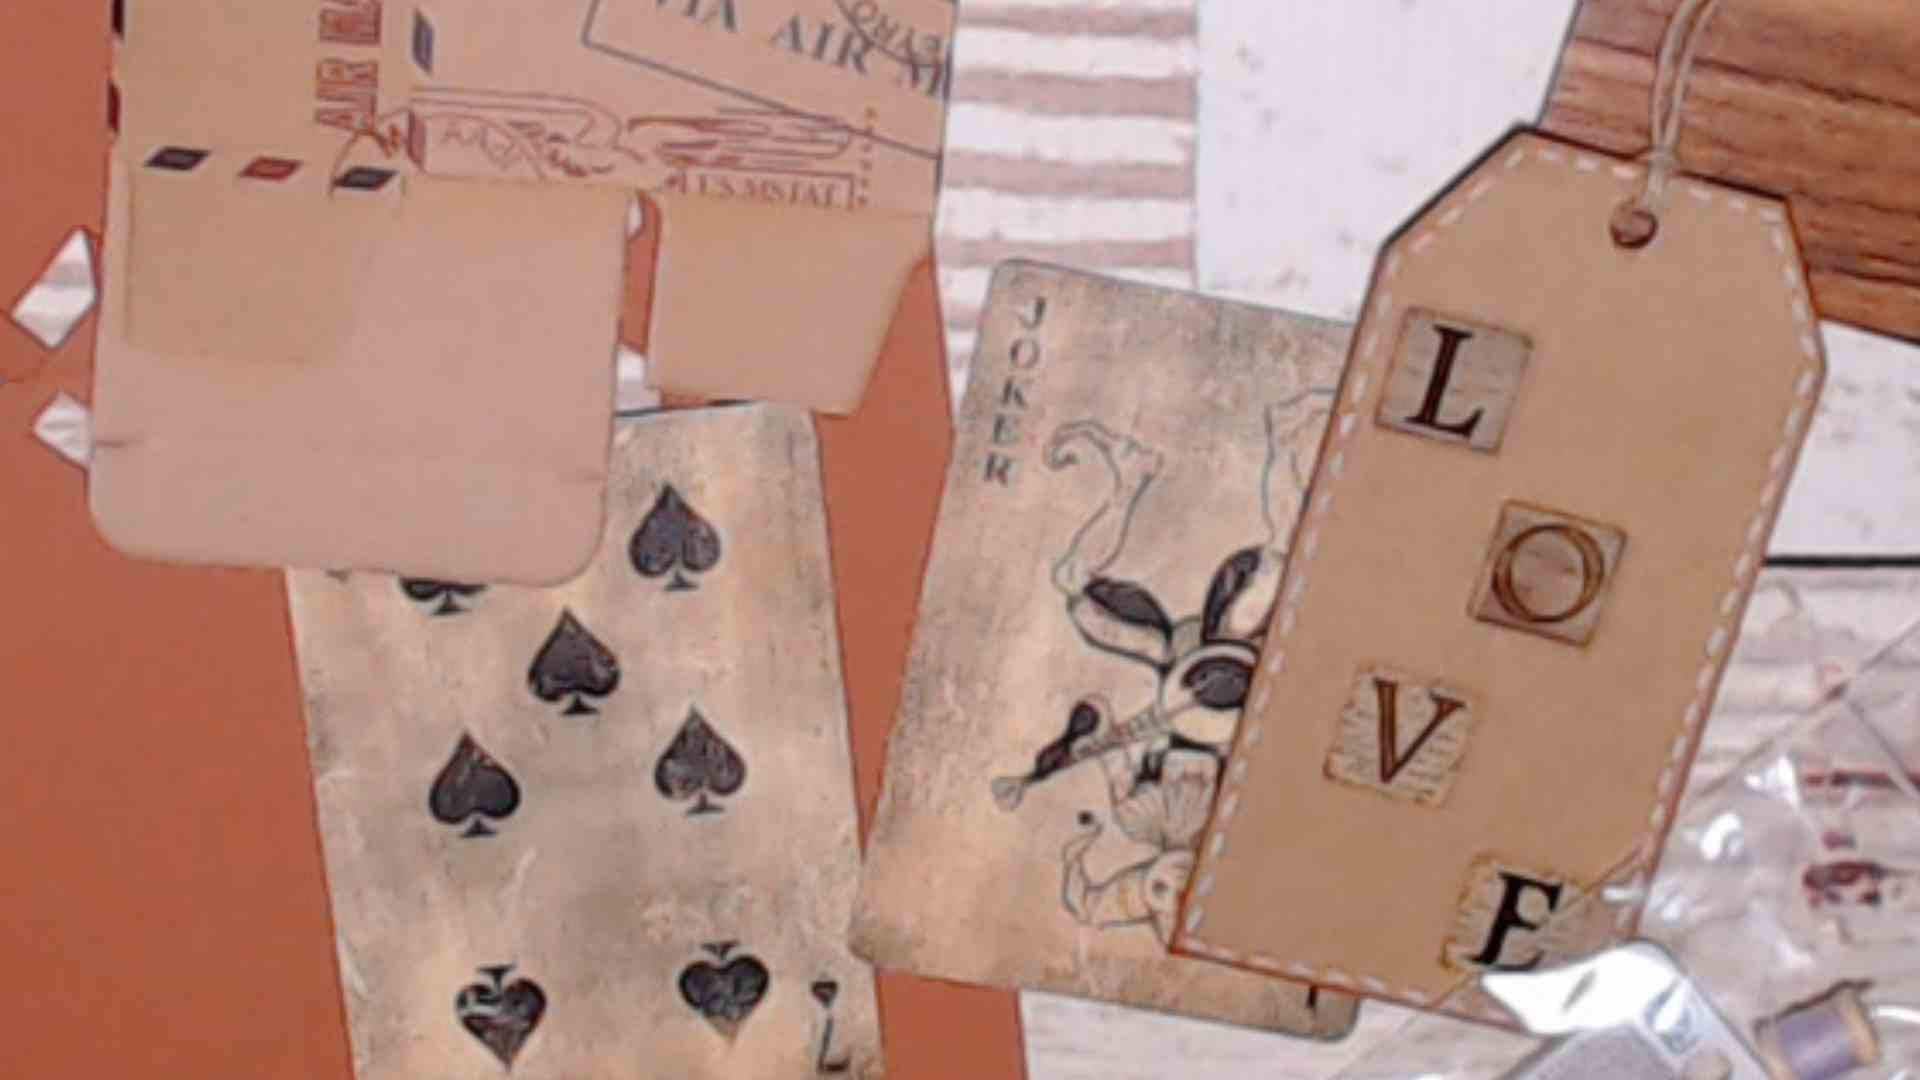 12-Piece Junk Journal Ephemera Lot, Grab Bag, Vintage Style, Handmade embellishments, Includes Fabric Flip, Playing Cards, Wax Seal and more